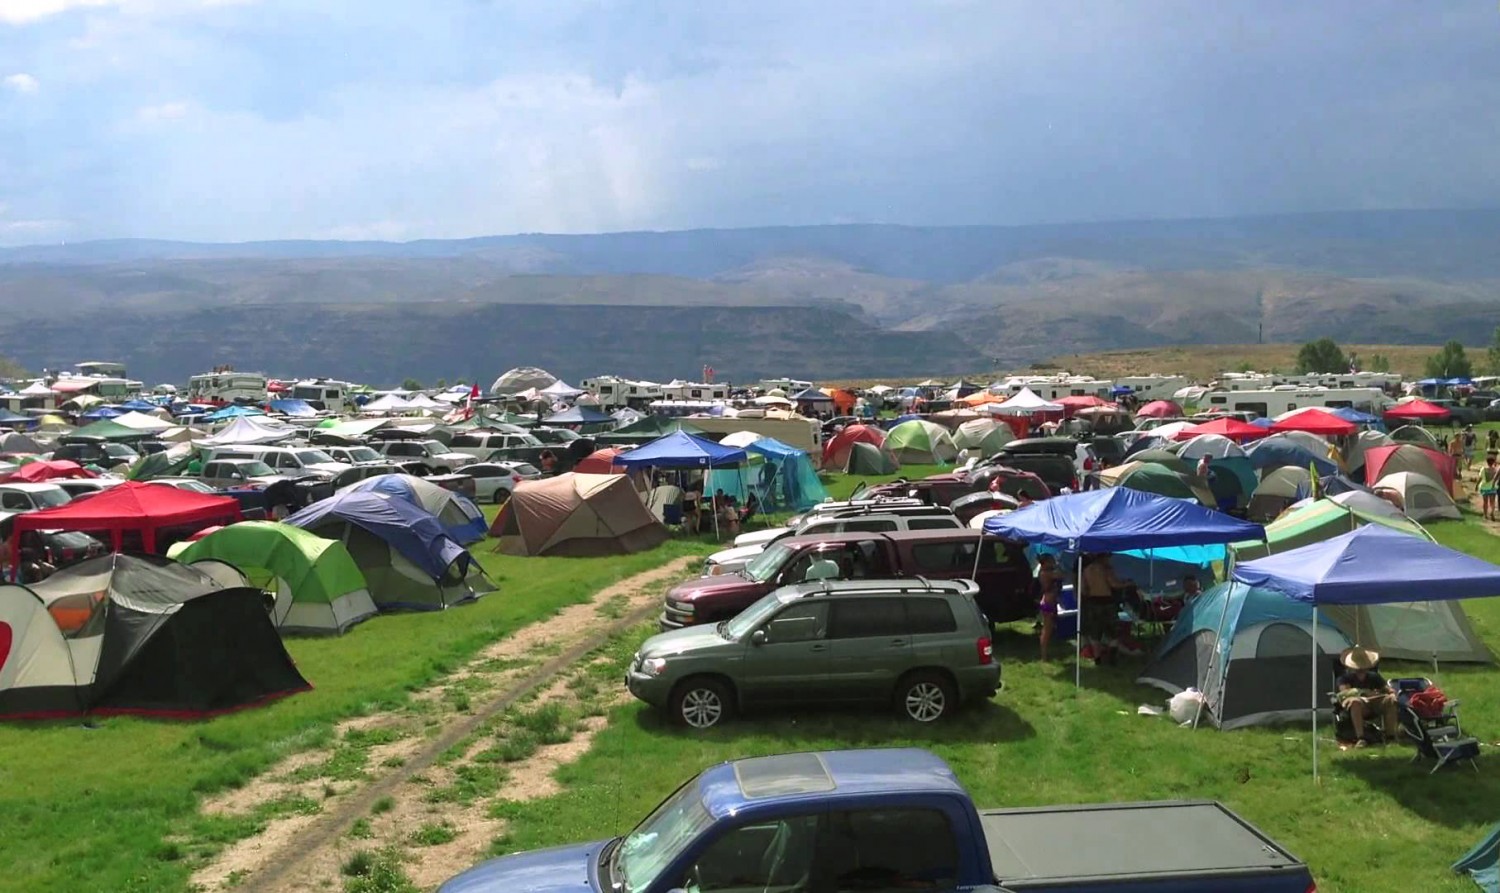 Glamping at Paradiso on a budget! See you at The Gorge!